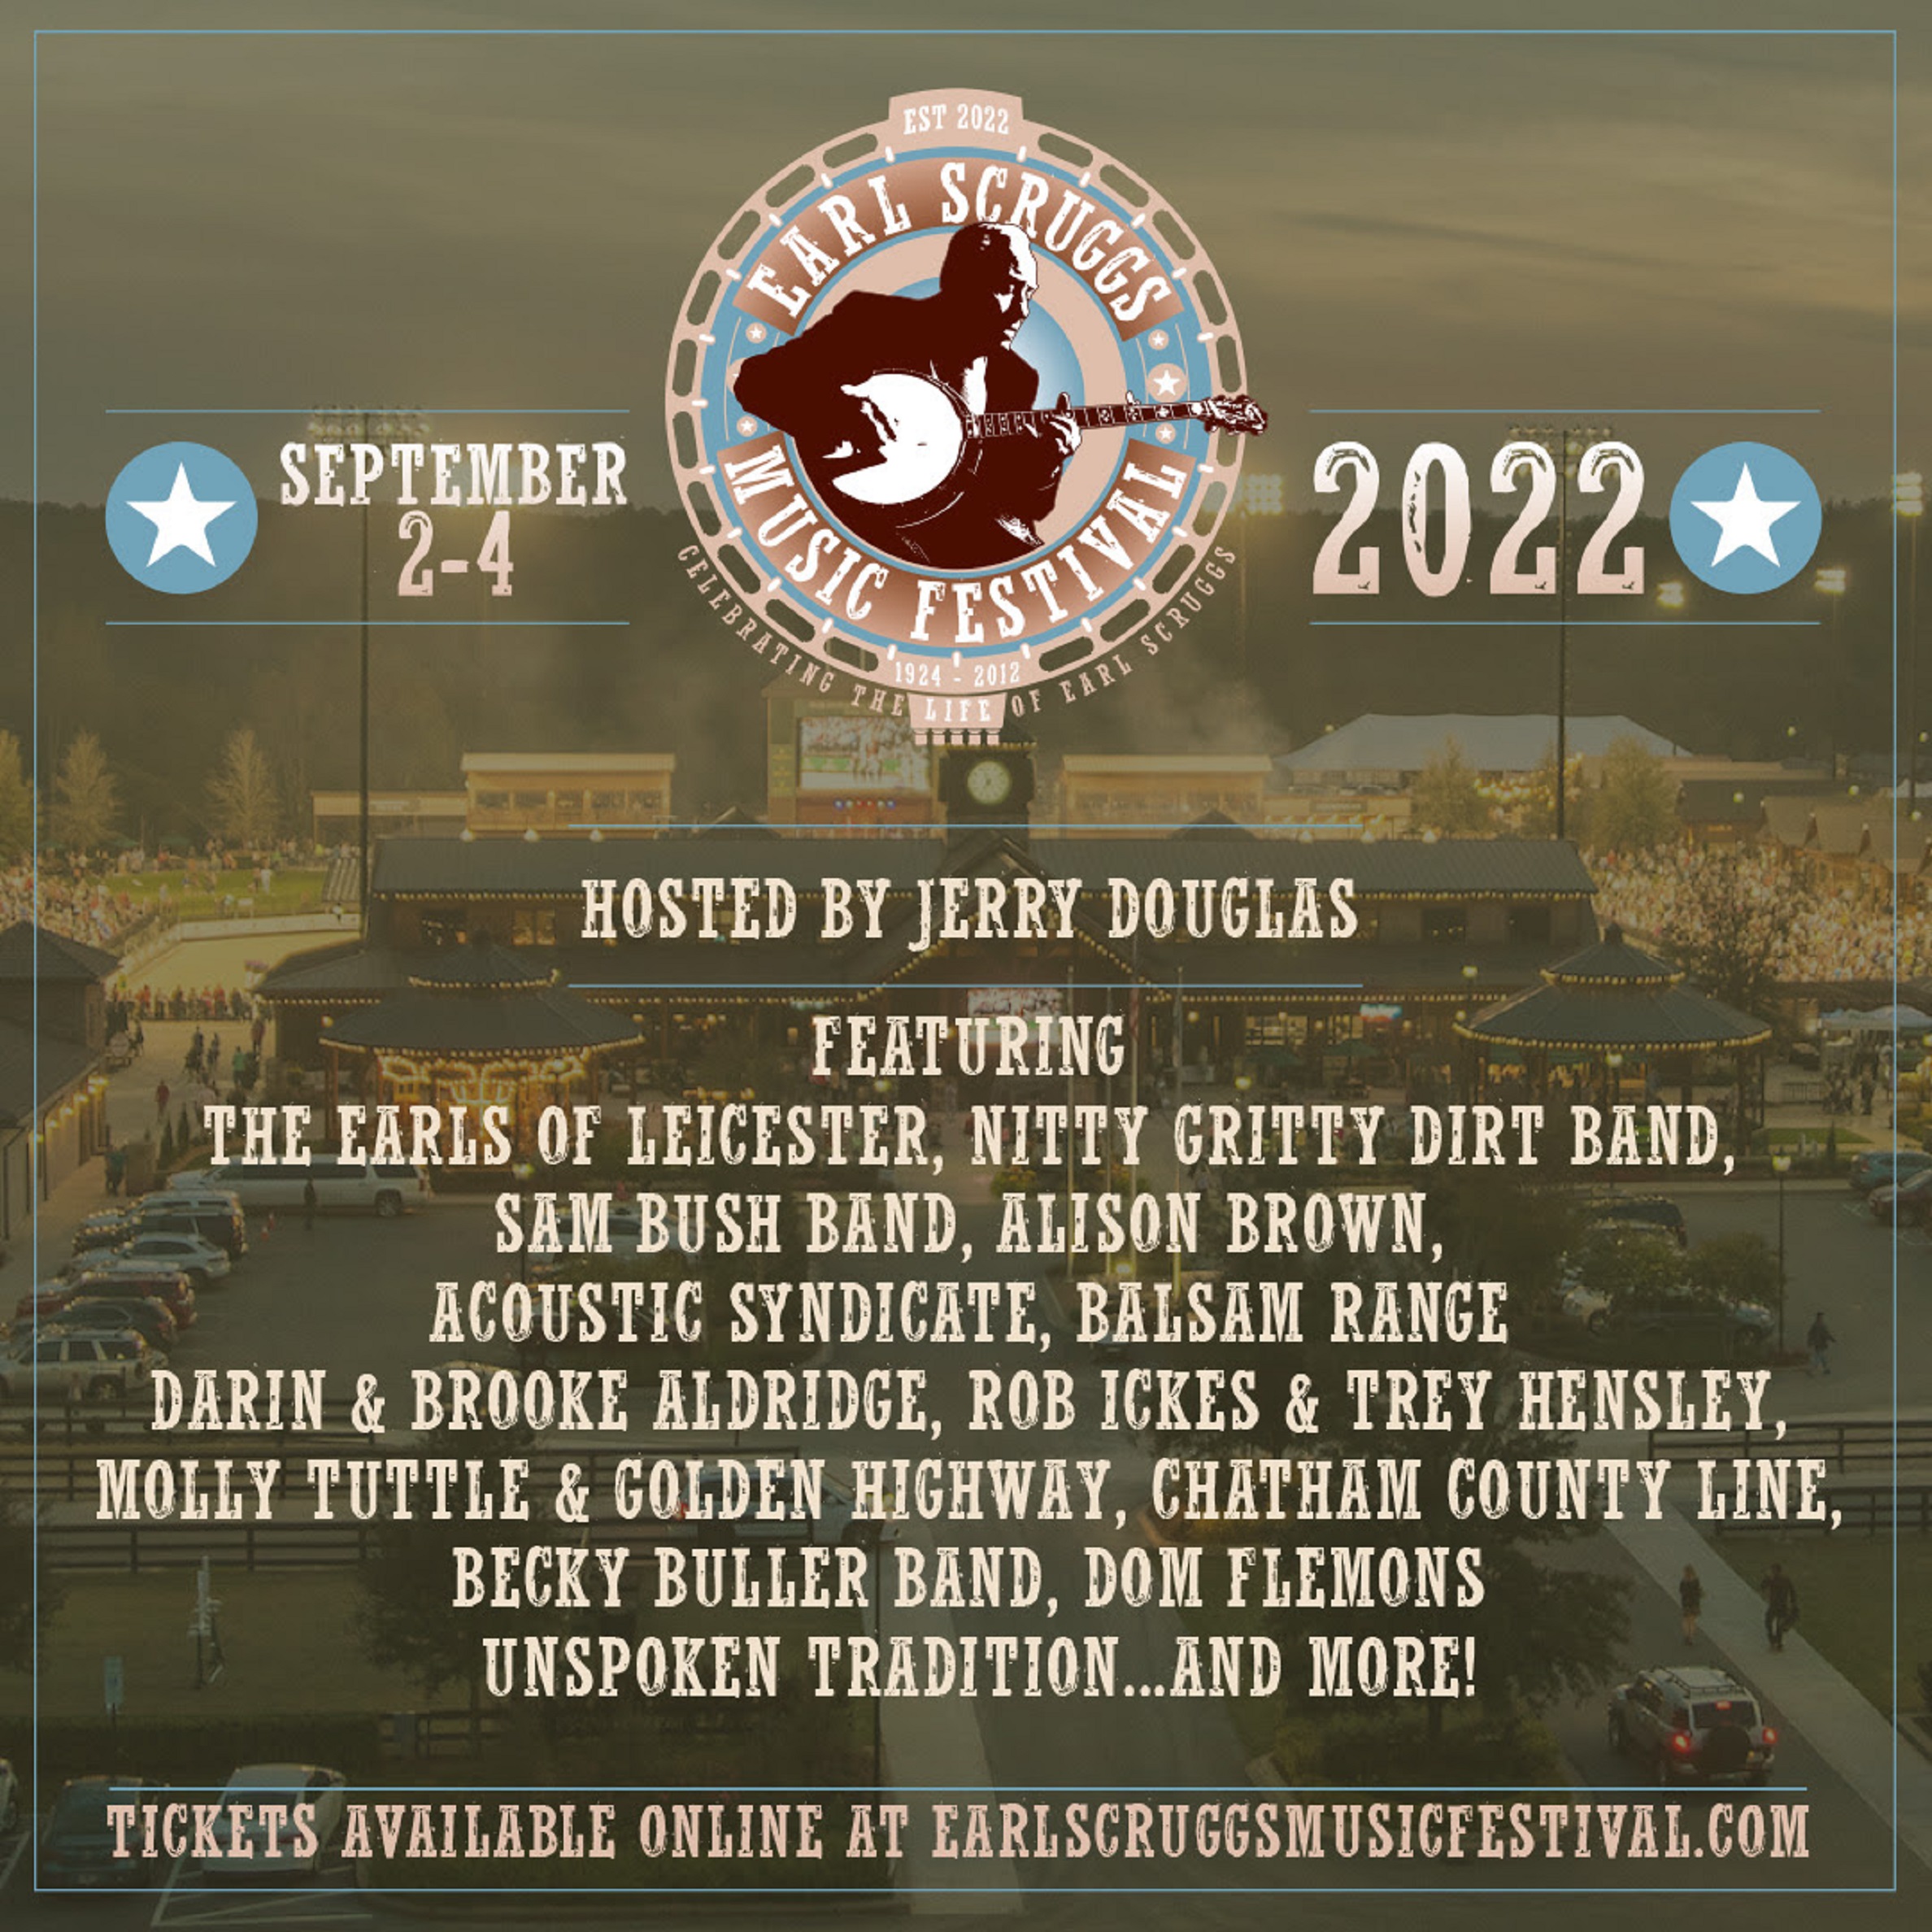 EARL SCRUGGS MUSIC FESTIVAL Announces Initial Artist Lineup For September 2-4, 2022 Inaugural Event